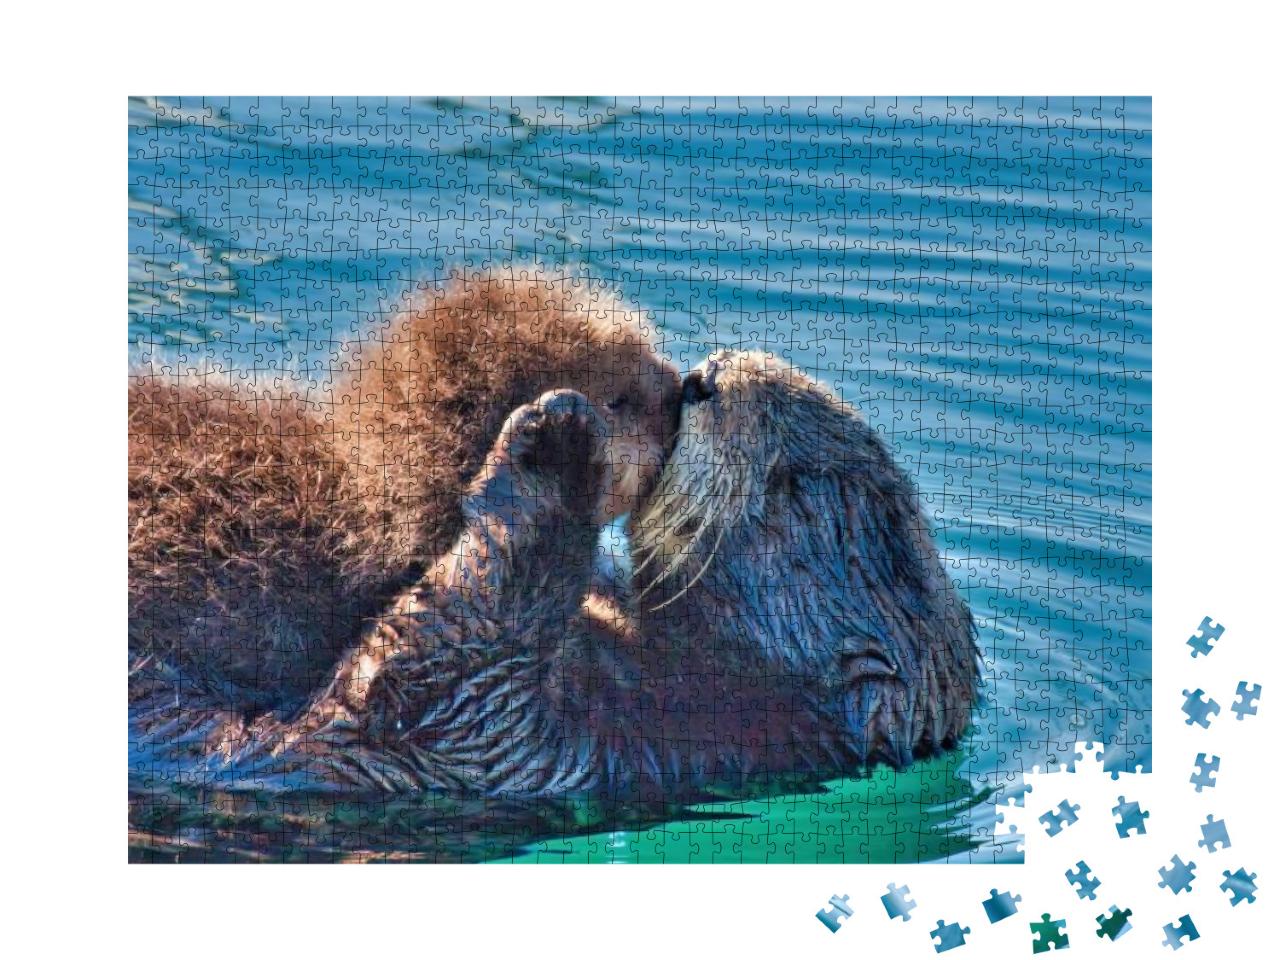 Mother Sea Otter Kissing Her Baby on the Lips... Jigsaw Puzzle with 1000 pieces